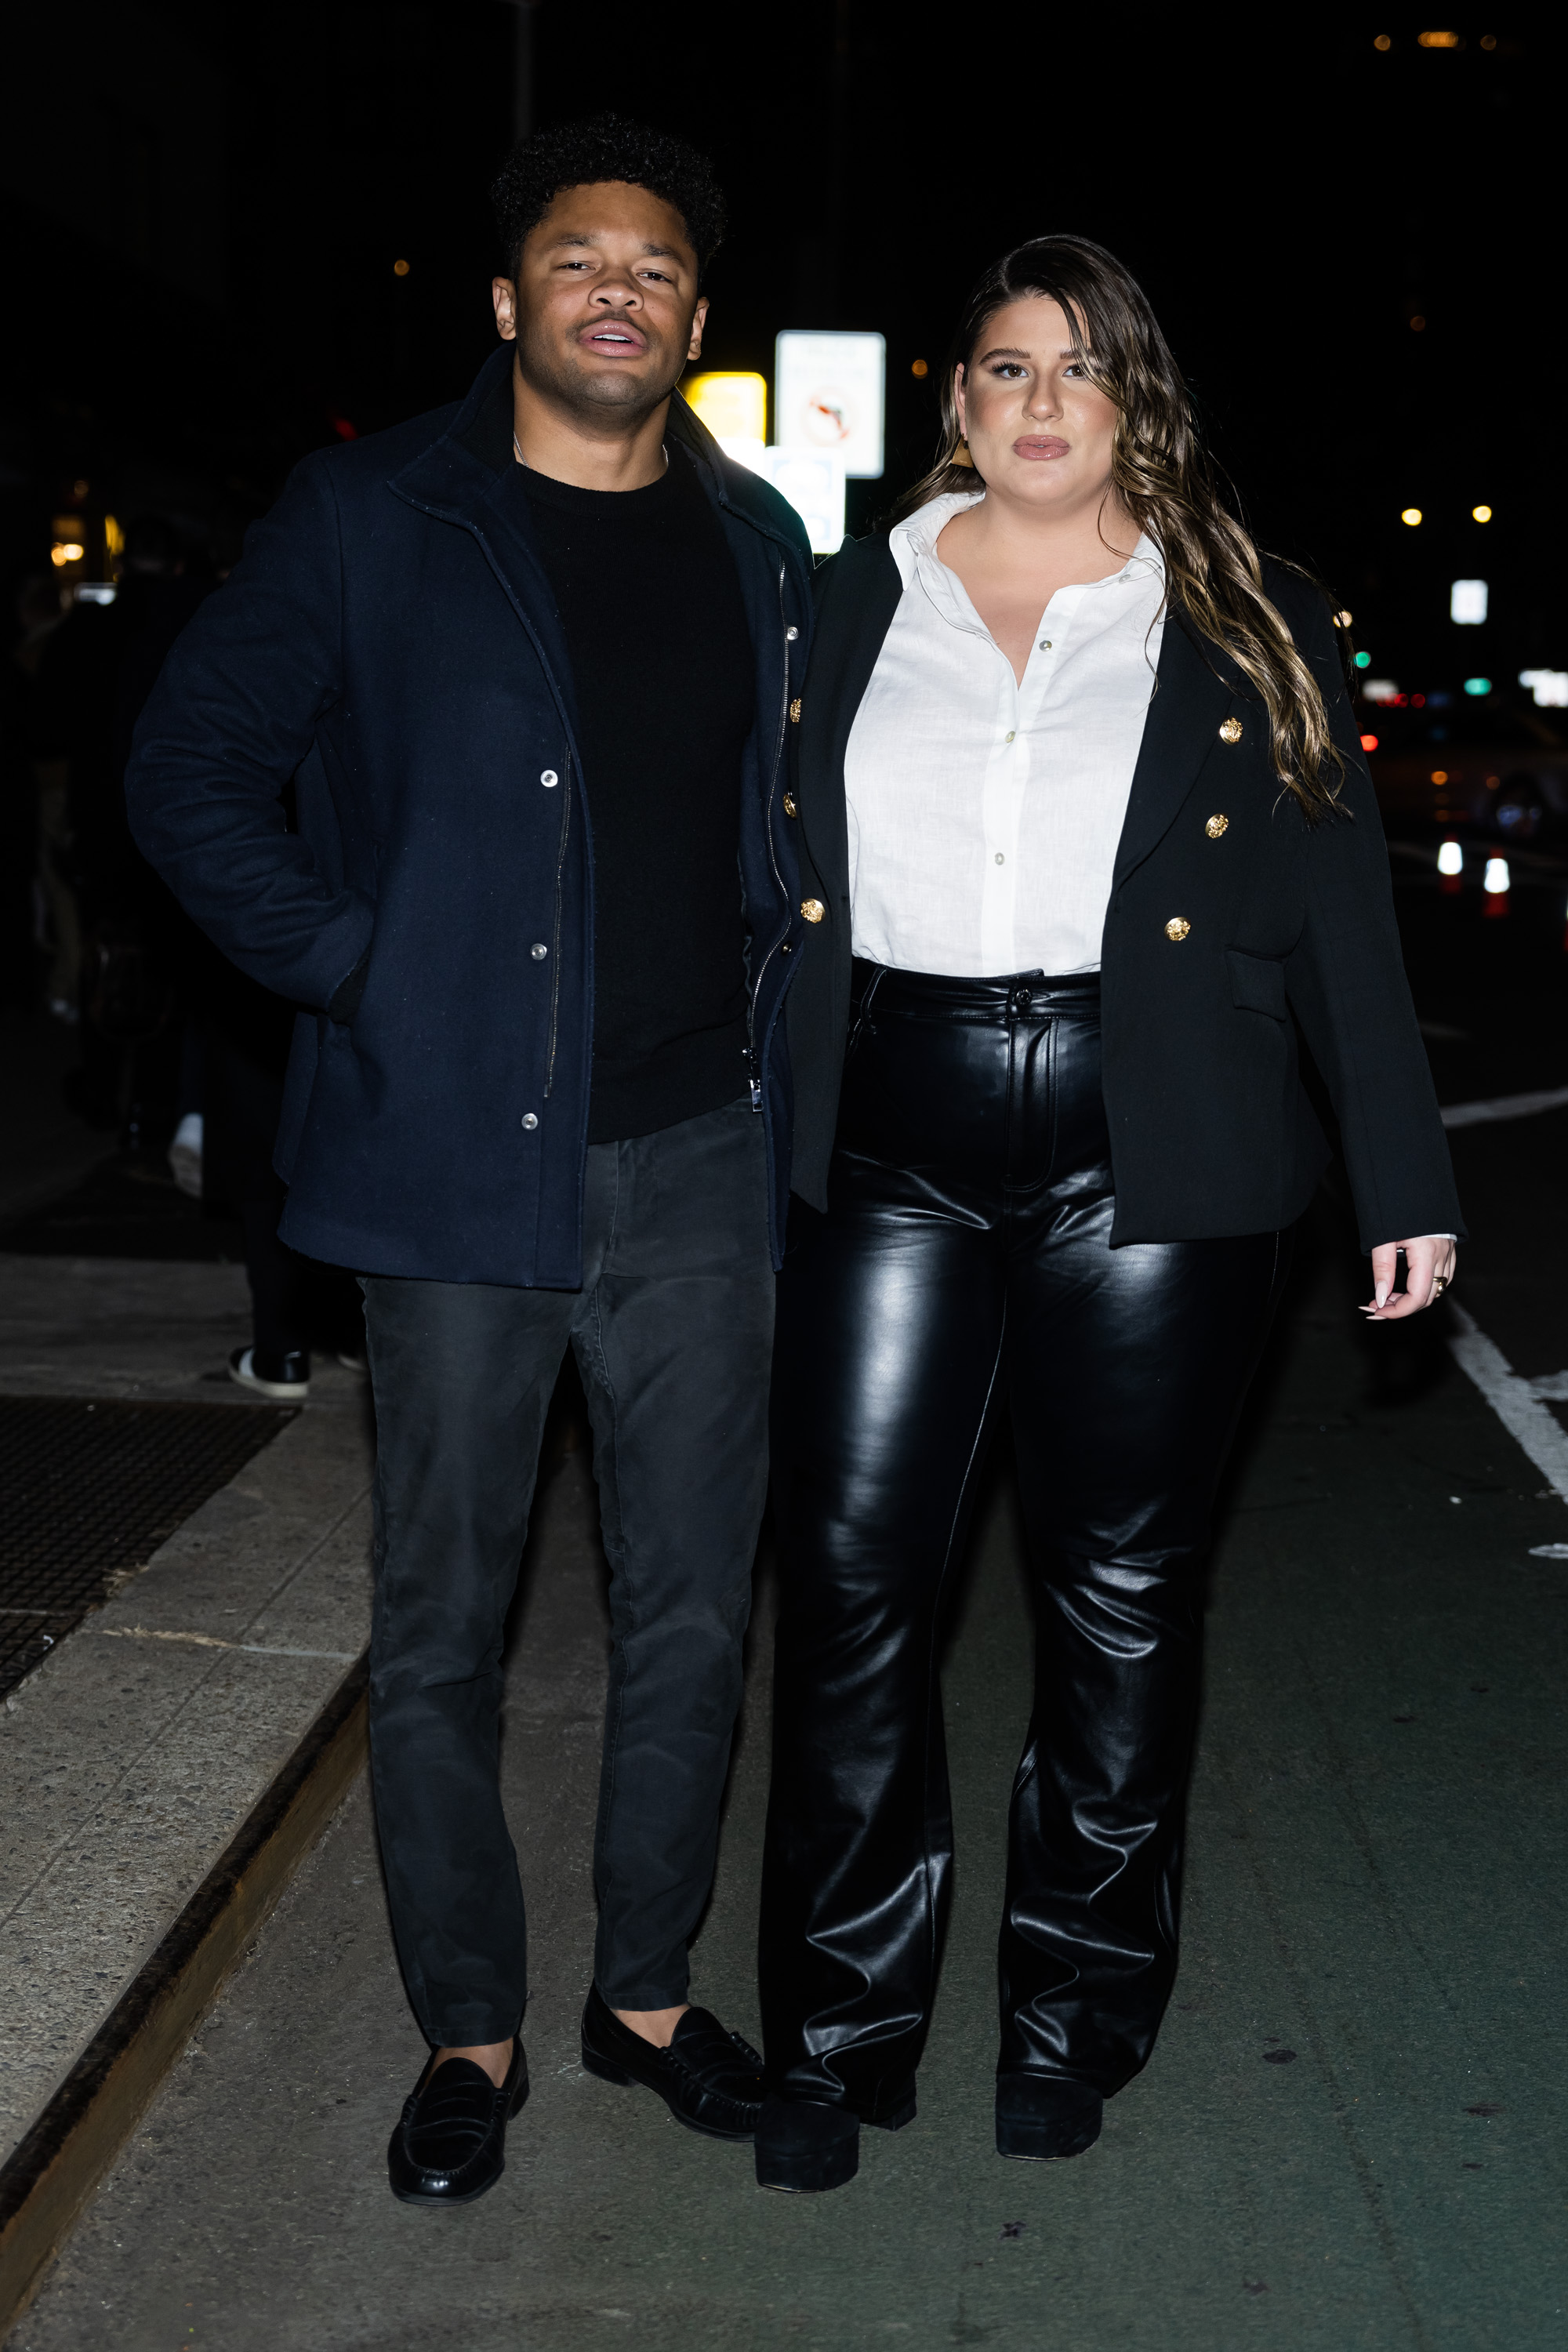 Remi Bader and her boyfriend at the Veronica Beard fashion show at Barney's Downtown in Chelsea on February 14, 2023, in New York City. | Source: Getty Images